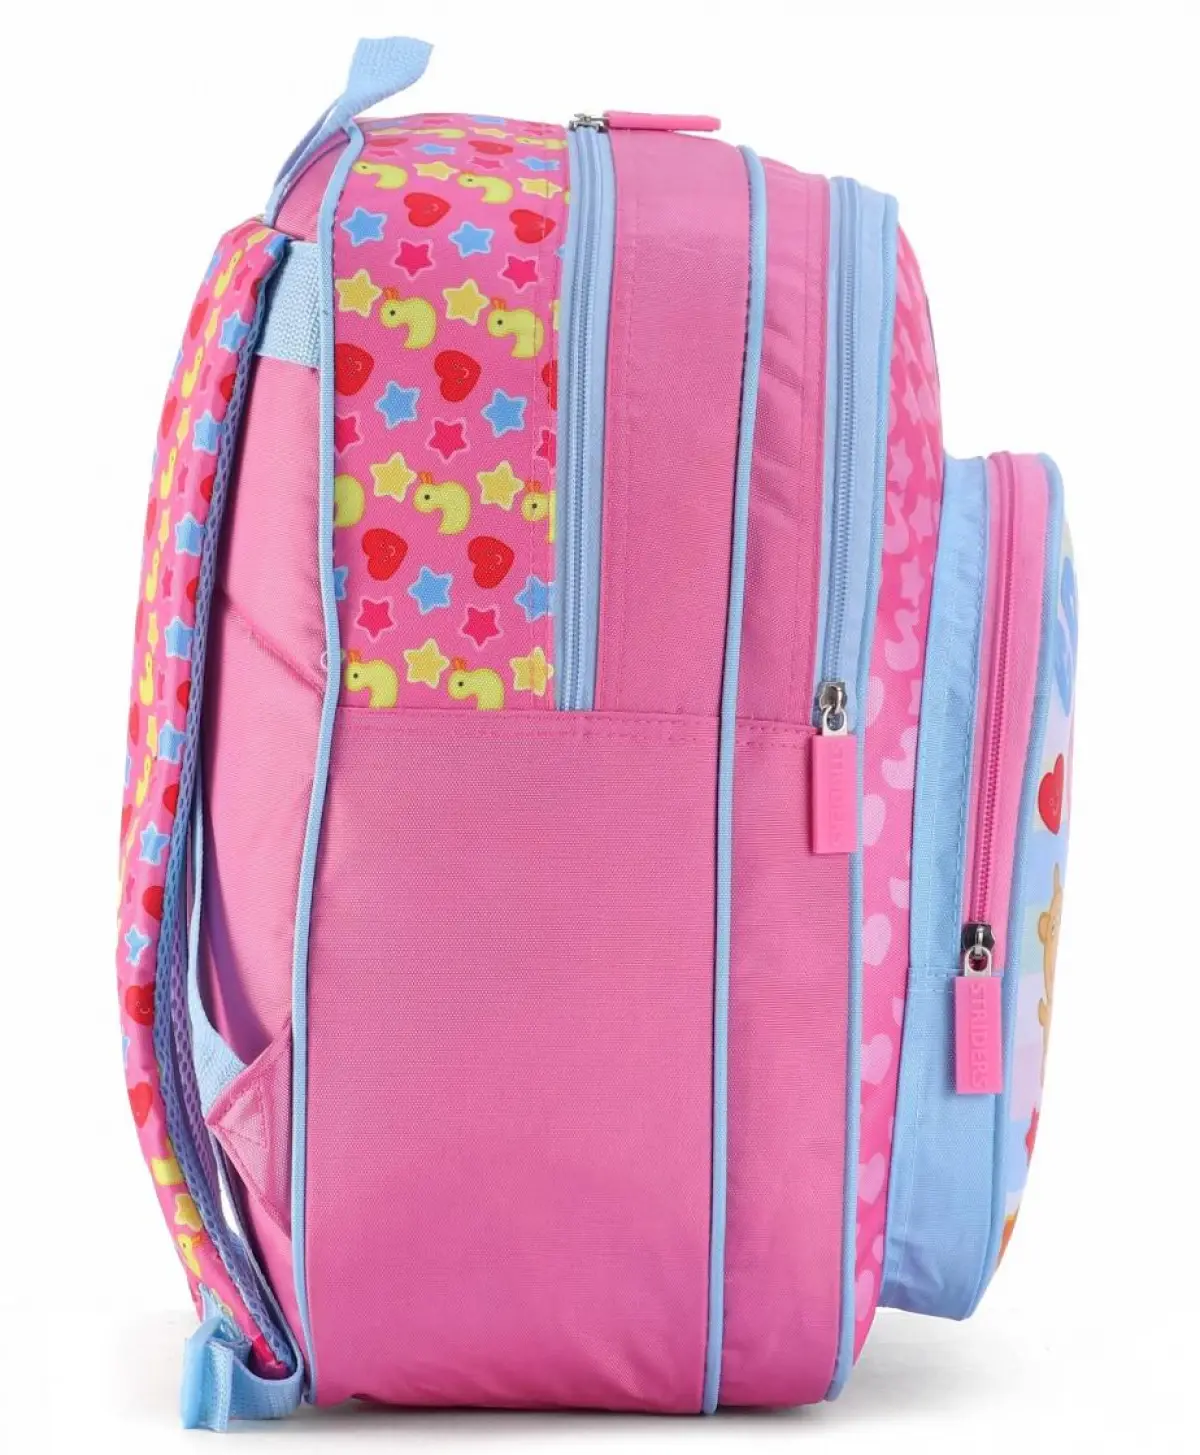 Striders 16 inches Peppa Pig-Inspired School Bag for Little Explorers Multicolor For Kids Ages 6Y+